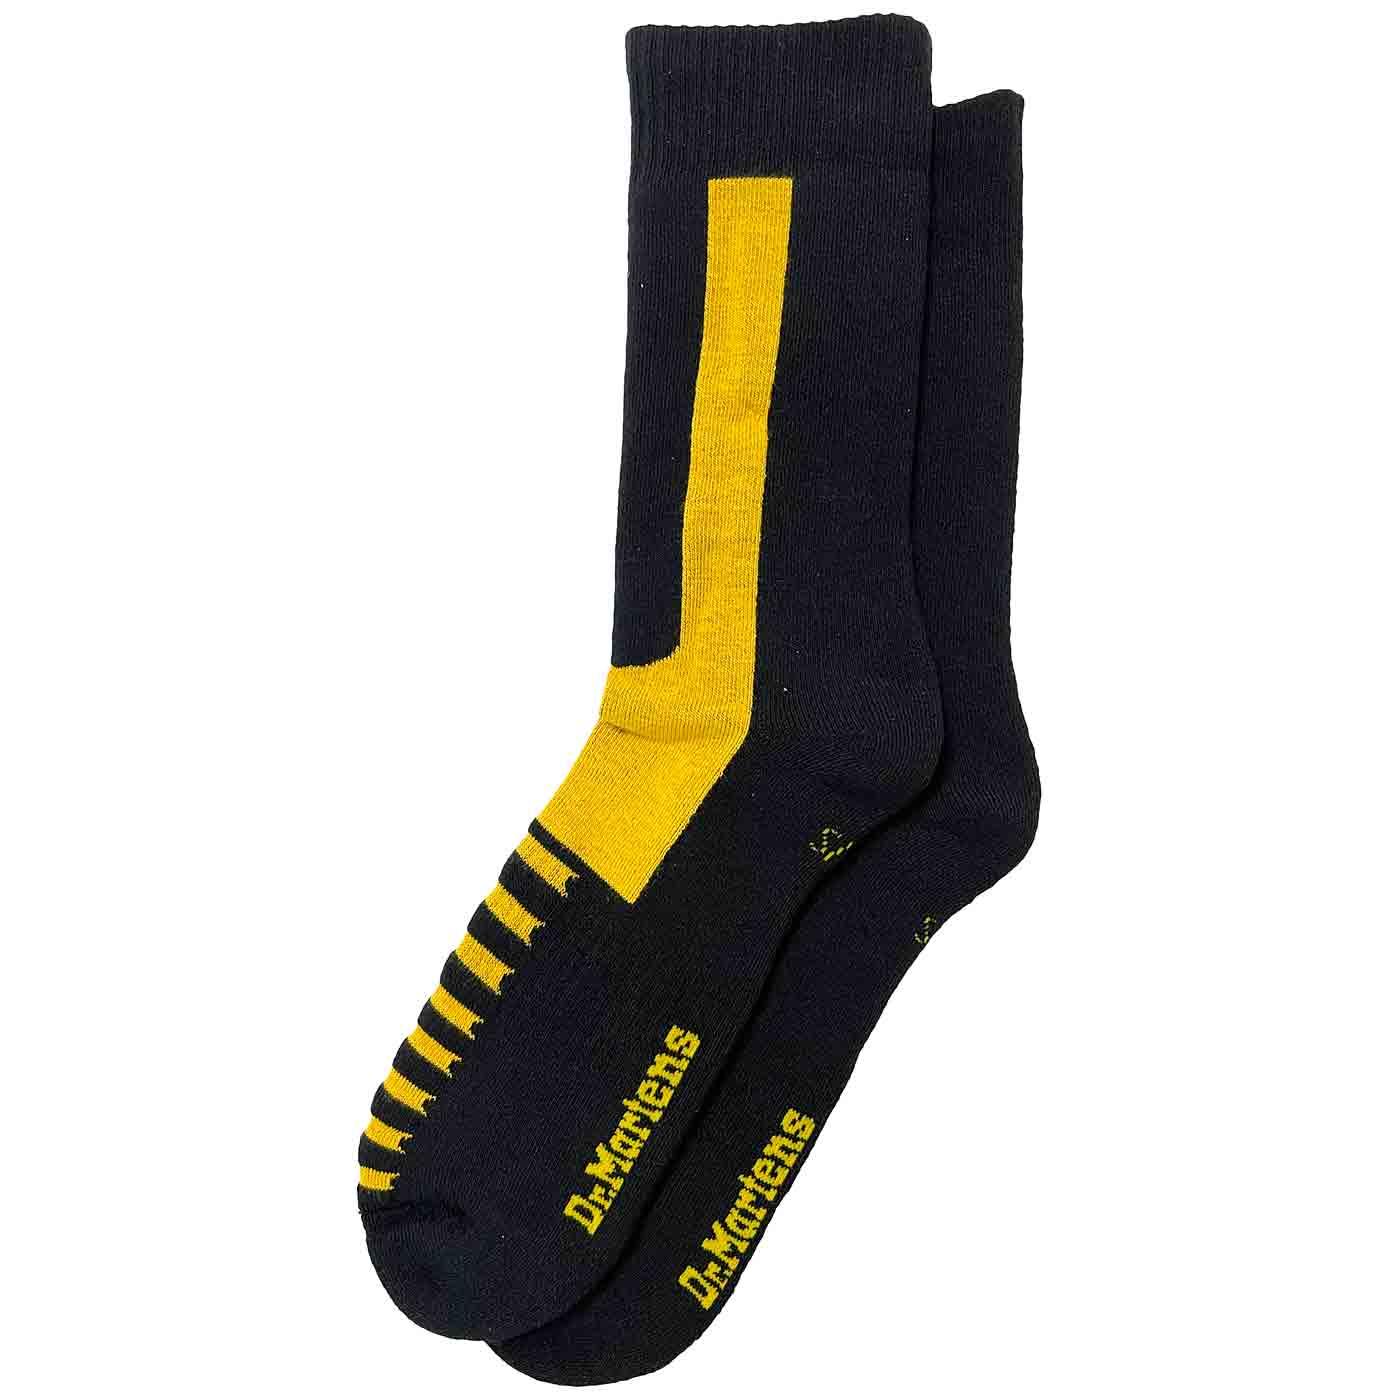 +Dr Martens Classic Double Doc Sock Black/Yellow